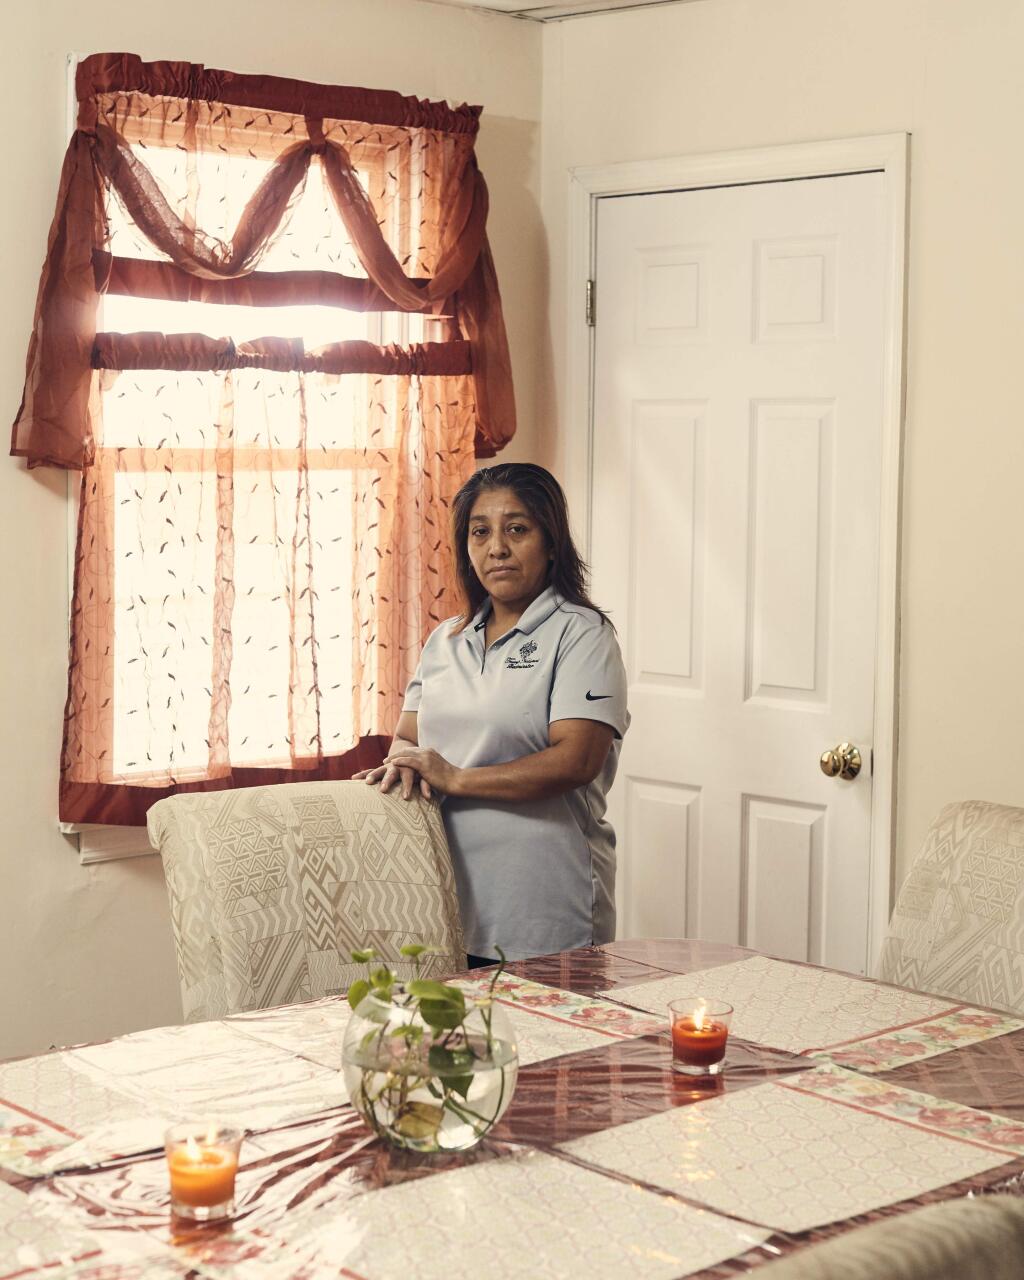 Victorina Morales at her home in Bound Brook, N.J., Nov. 2, 2018. At the president's New Jersey golf course, Morales, an undocumented immigrant, has worked as a maid since 2013. She said she never imagined she “would see such important people close up.” (Christopher Gregory/The New York Times)